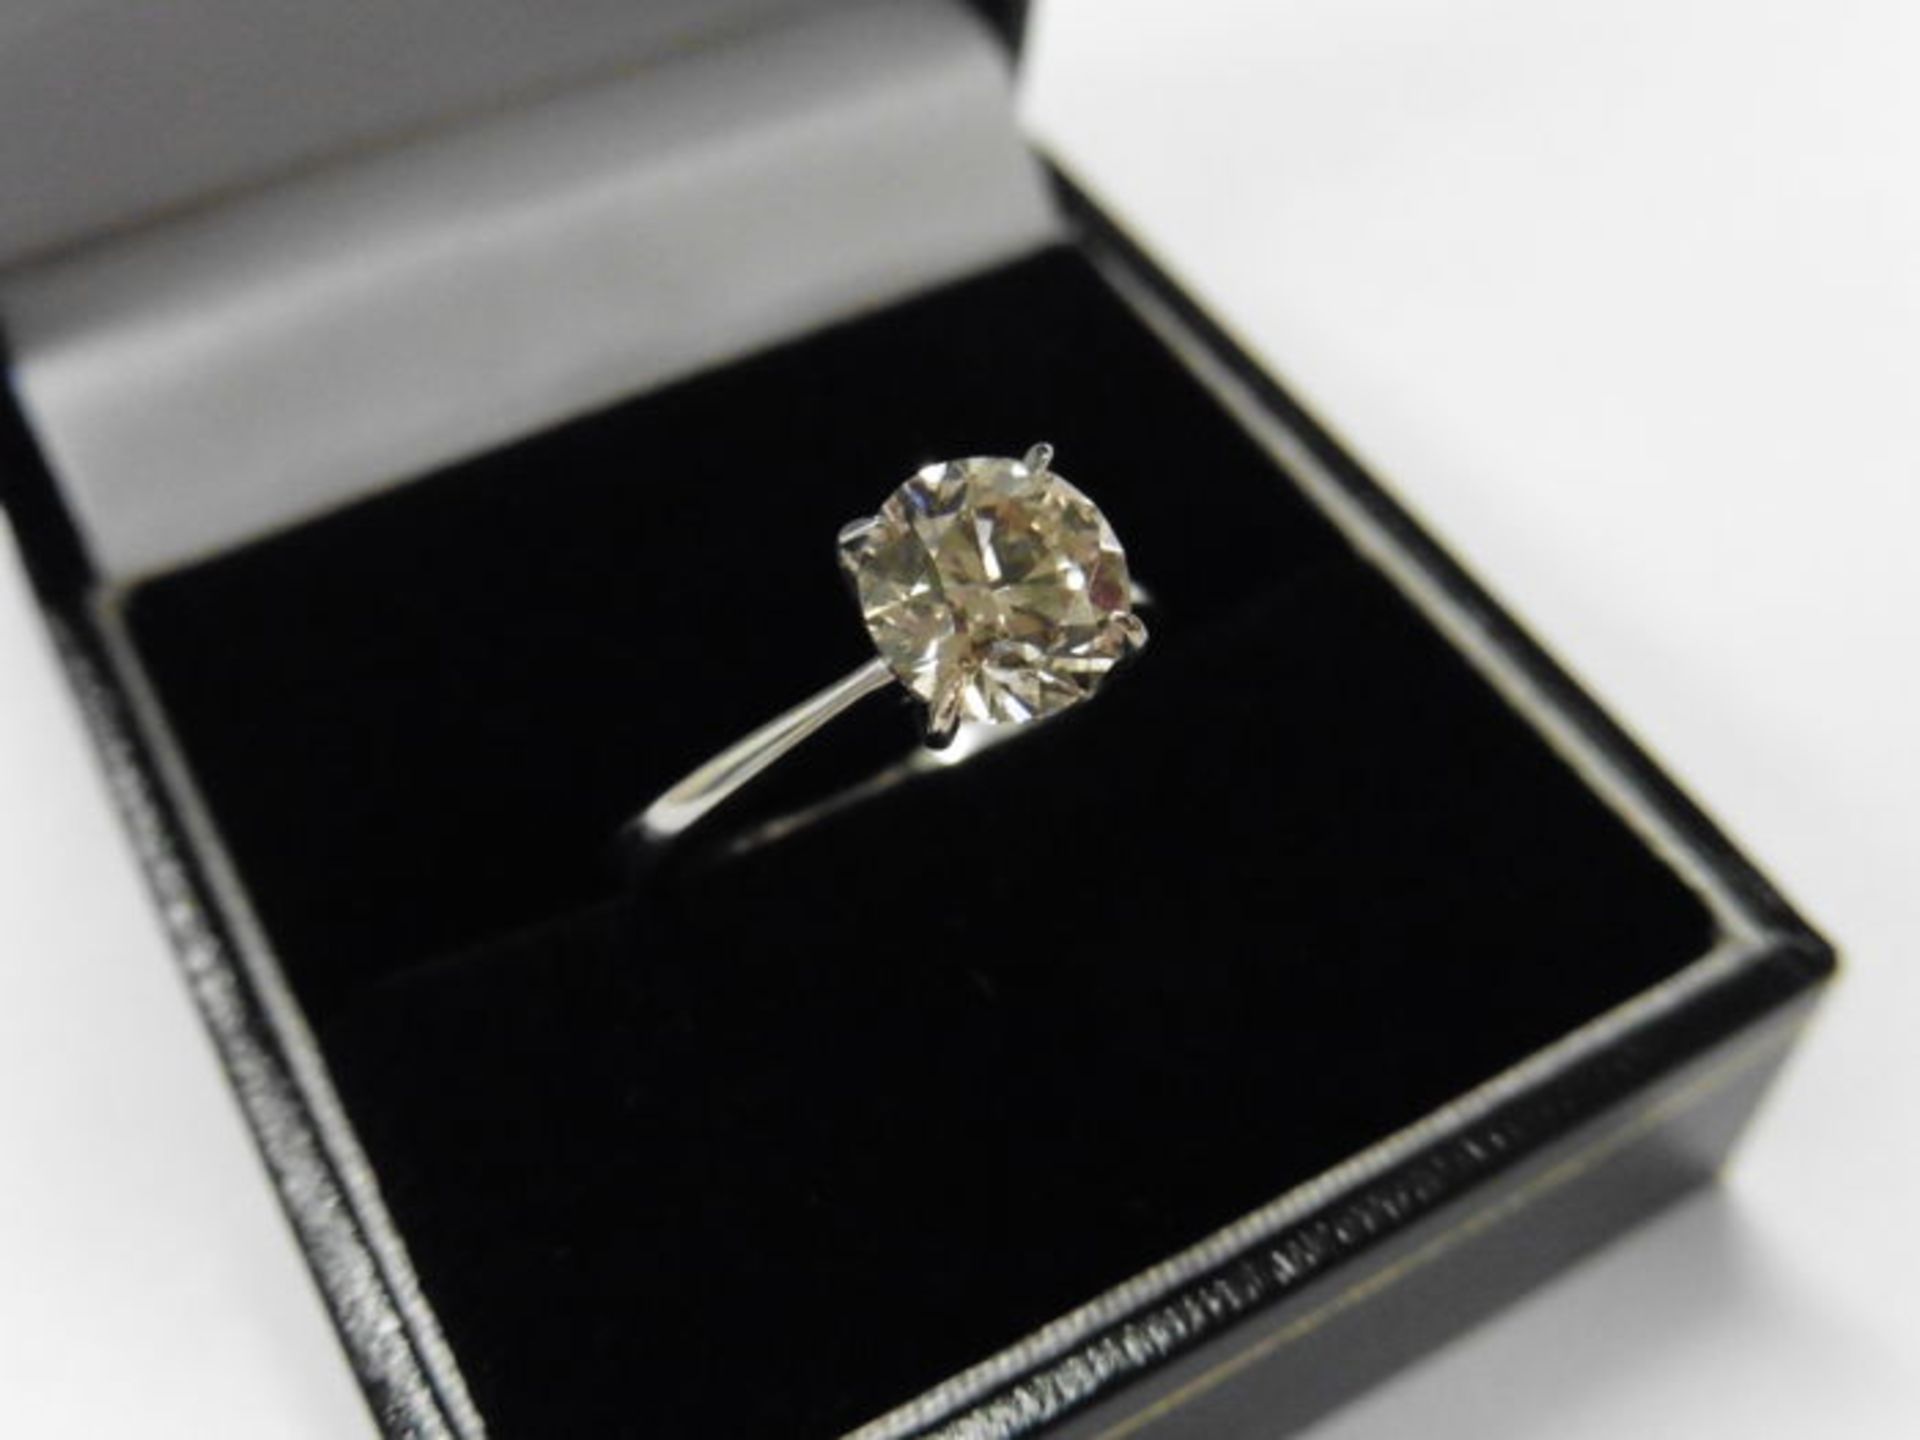 1.52ct diamond solitaire ring set in platinum. WGI certification - 9624102572. K colour and SI1 - Image 3 of 4